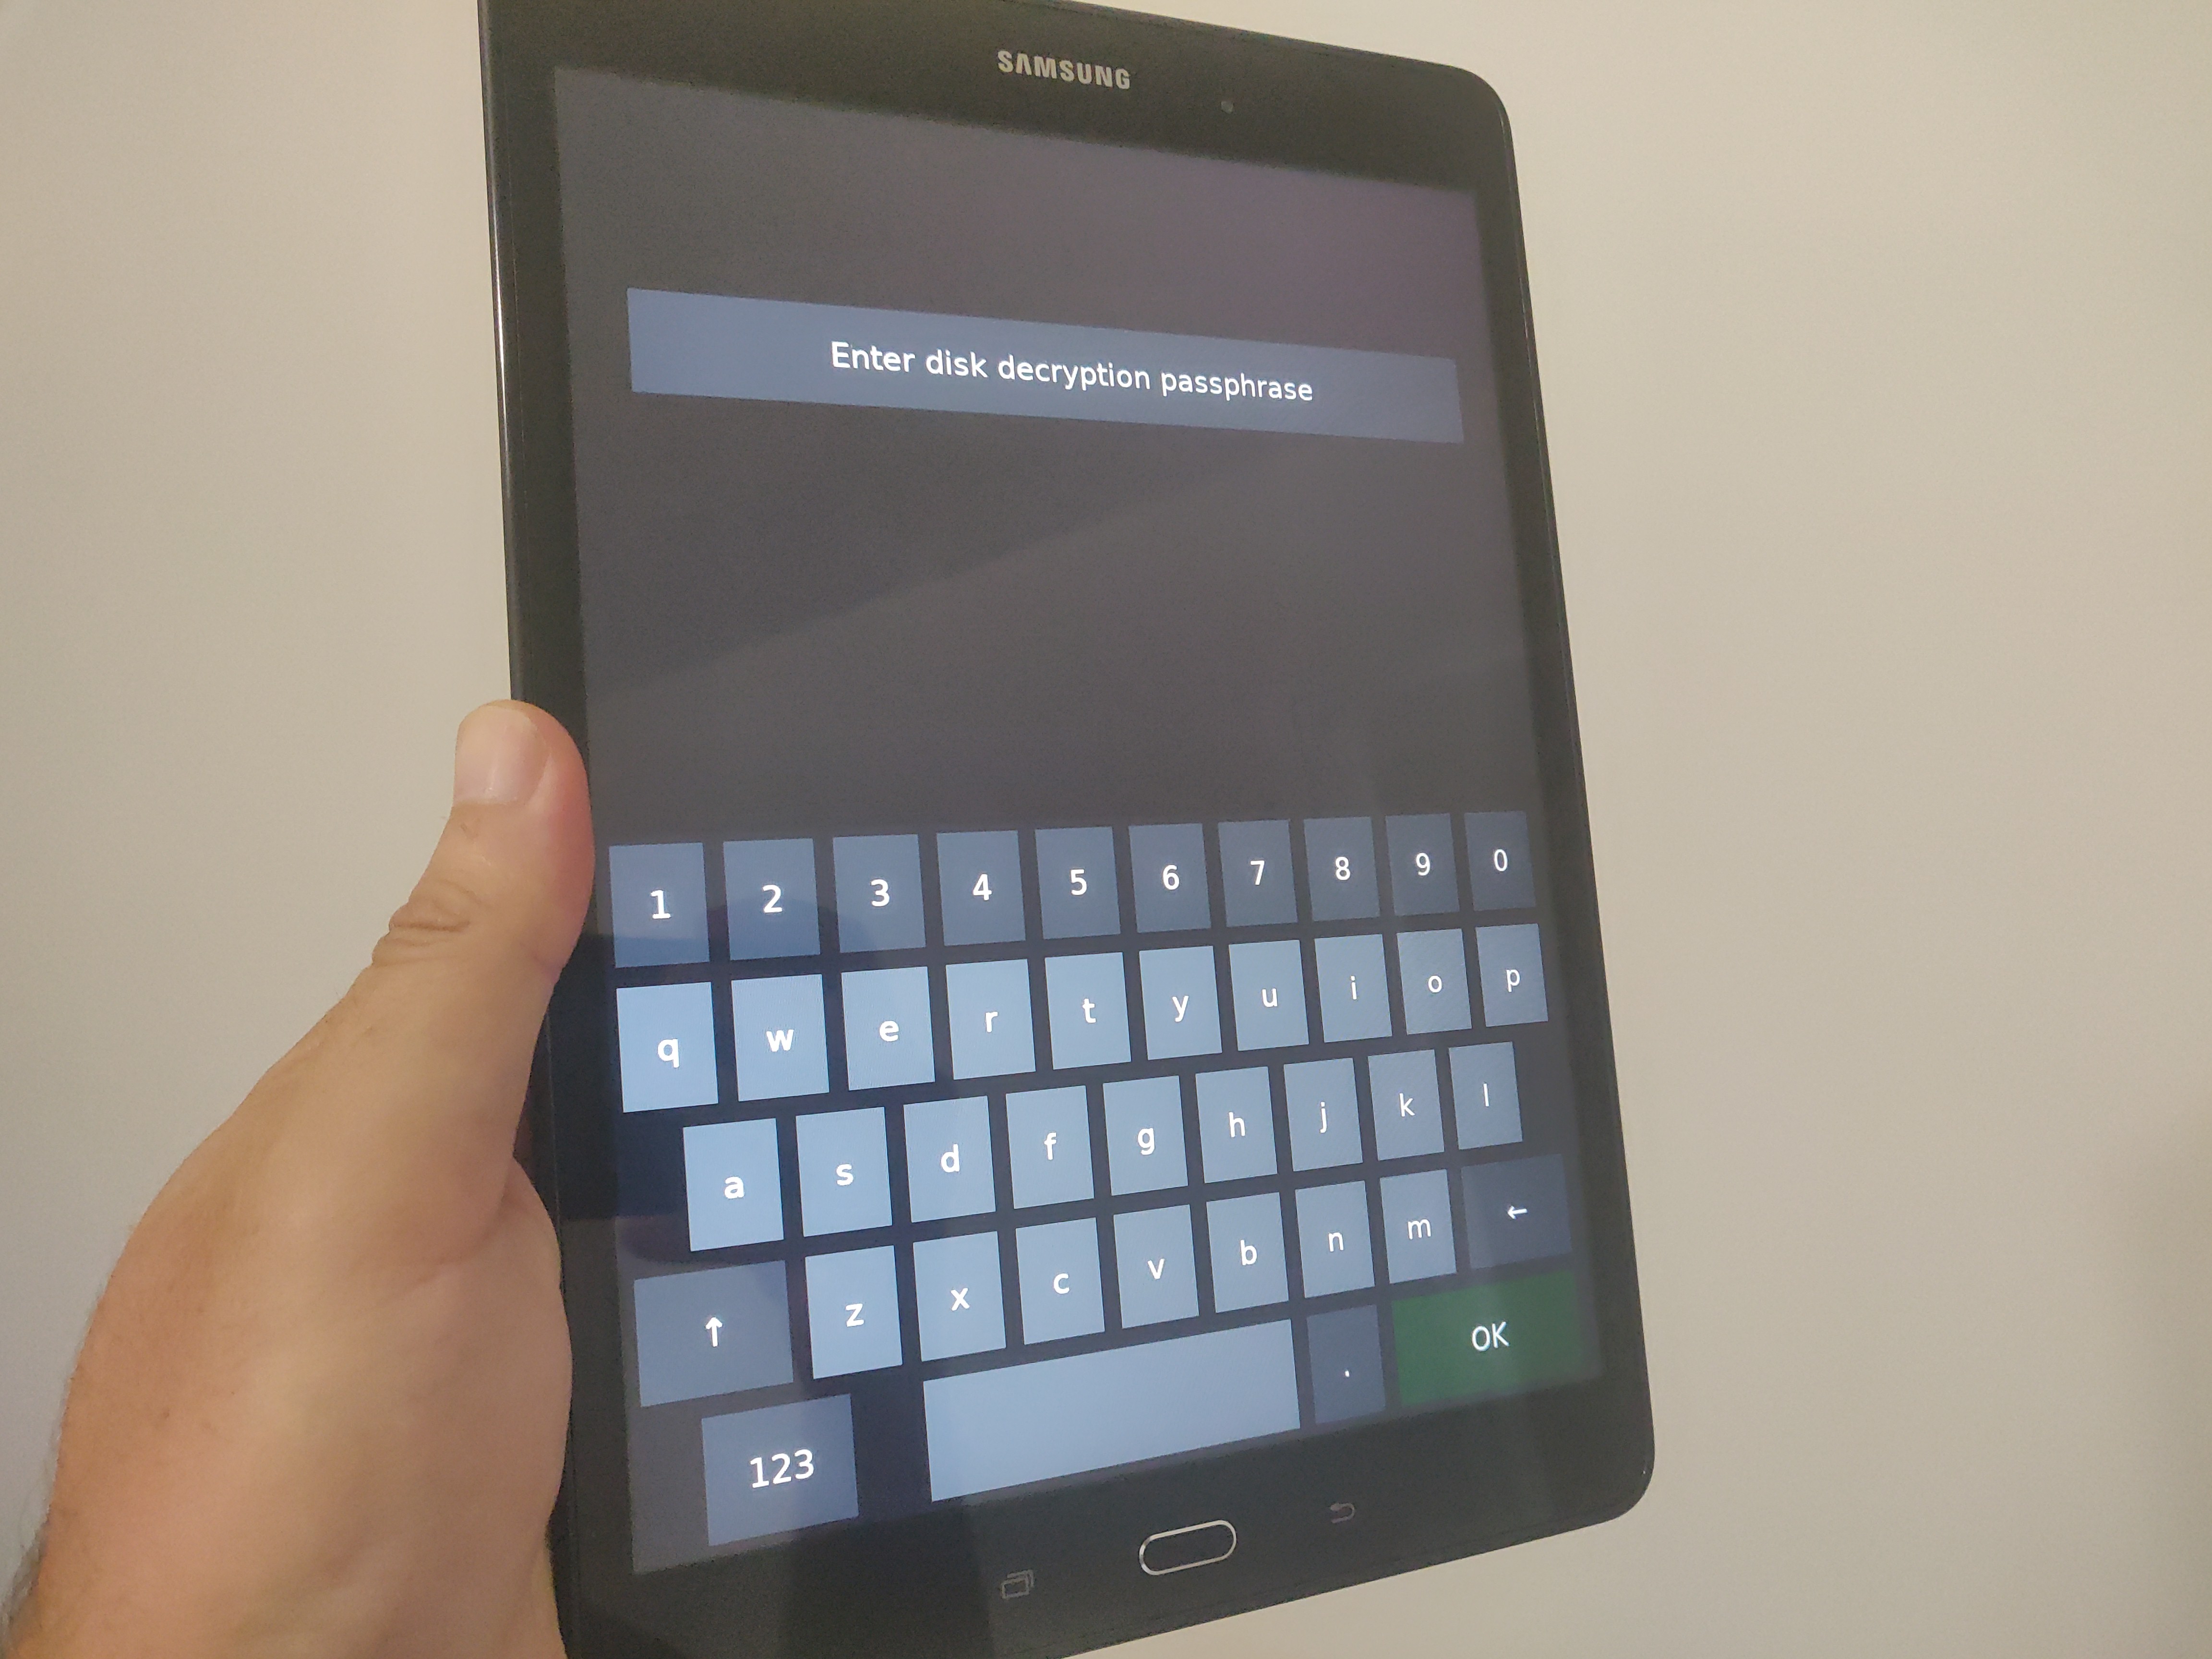 Photo of a black Samsung Galaxy Tab, being held on the lefthand side in portrait orientation, showing the full disk encryption unlocking screen